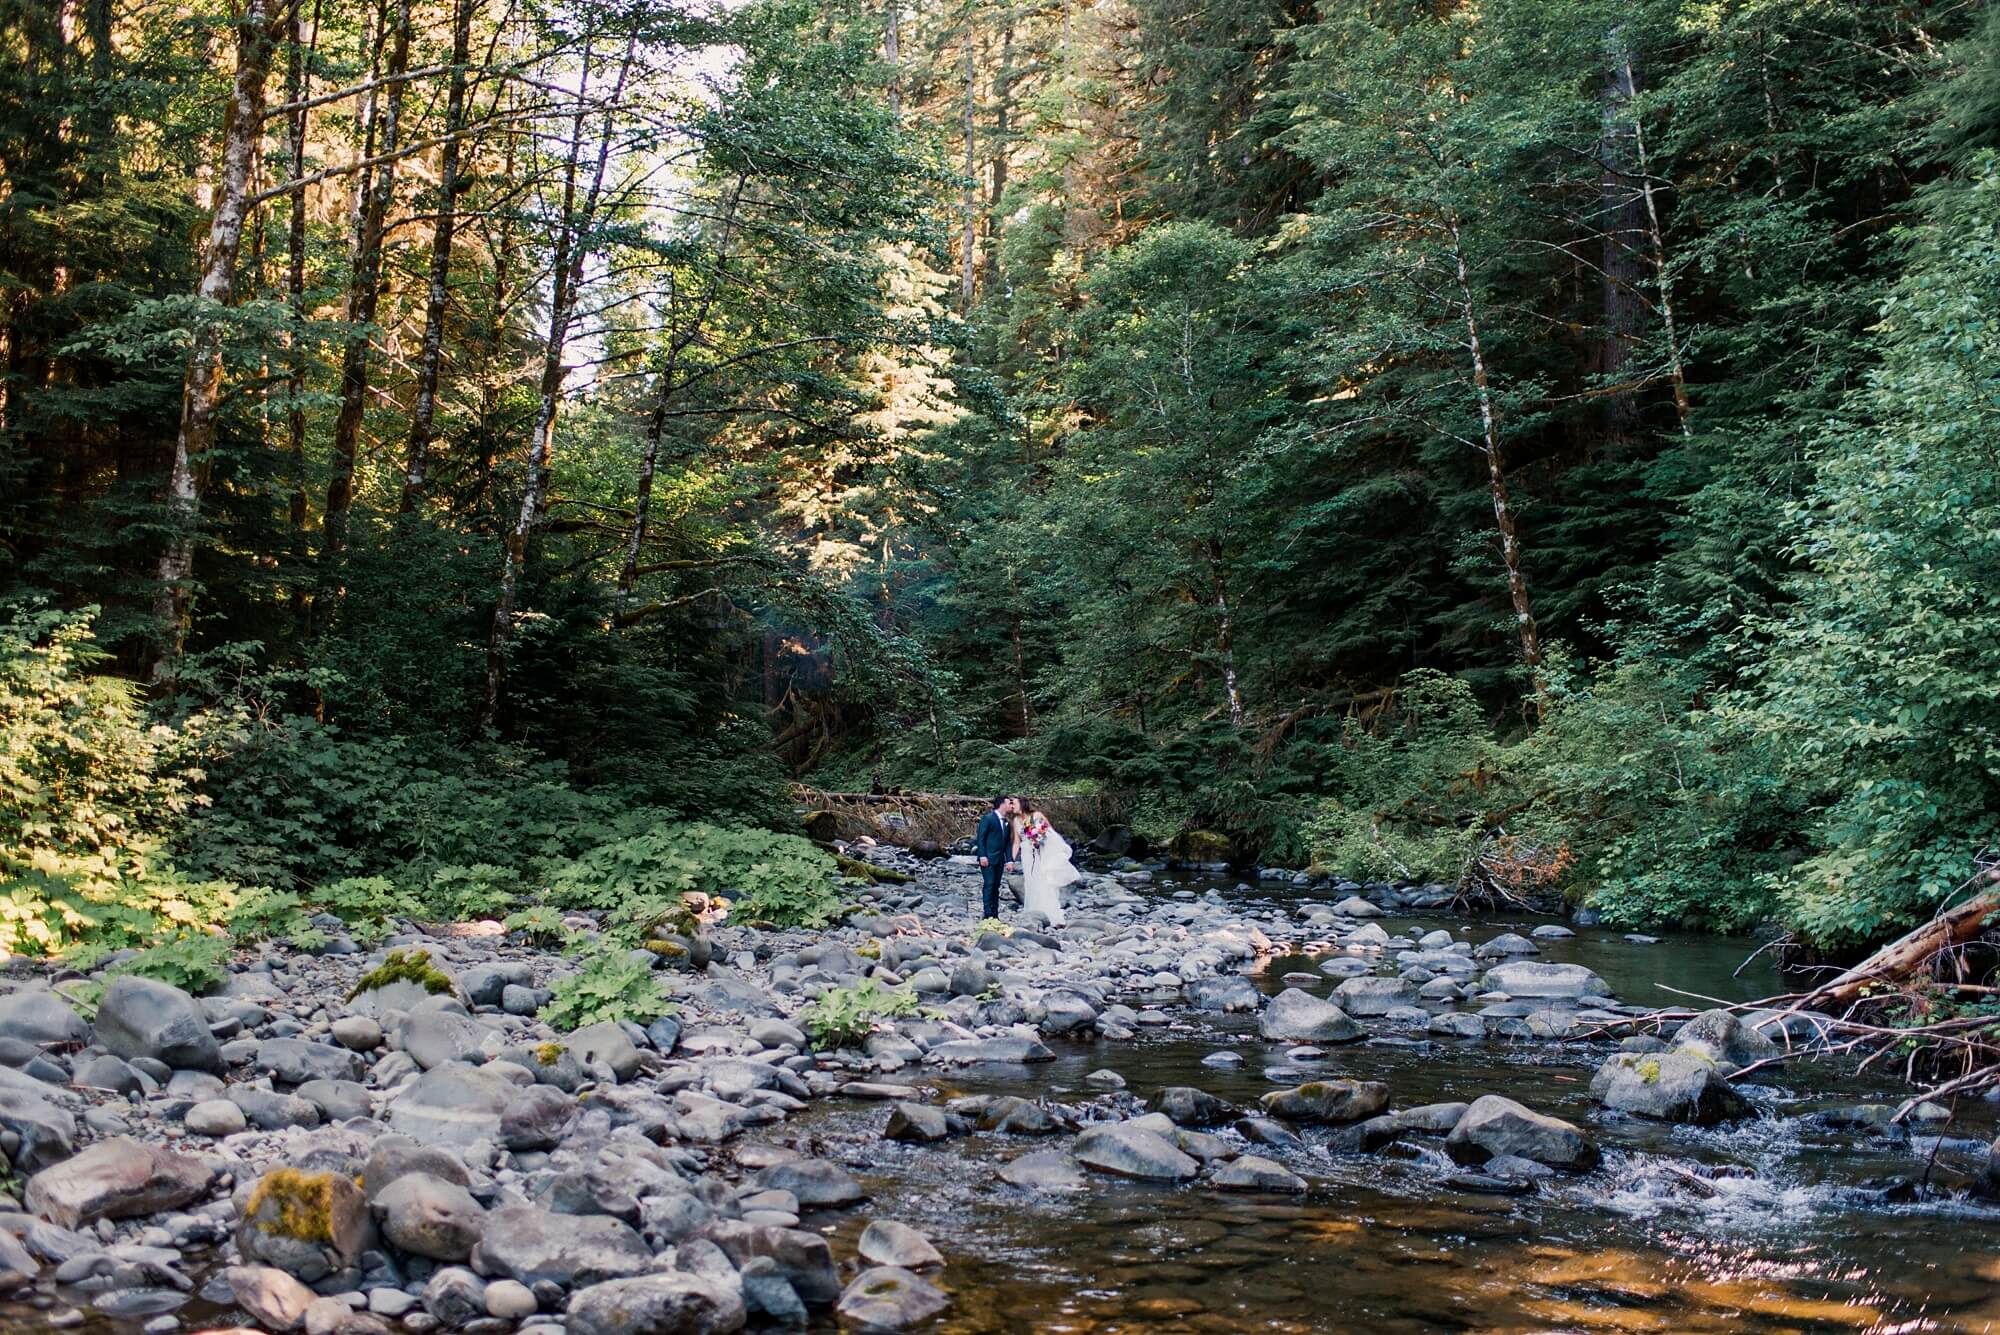 Bride and groom by a river in the Hoh Rainforest